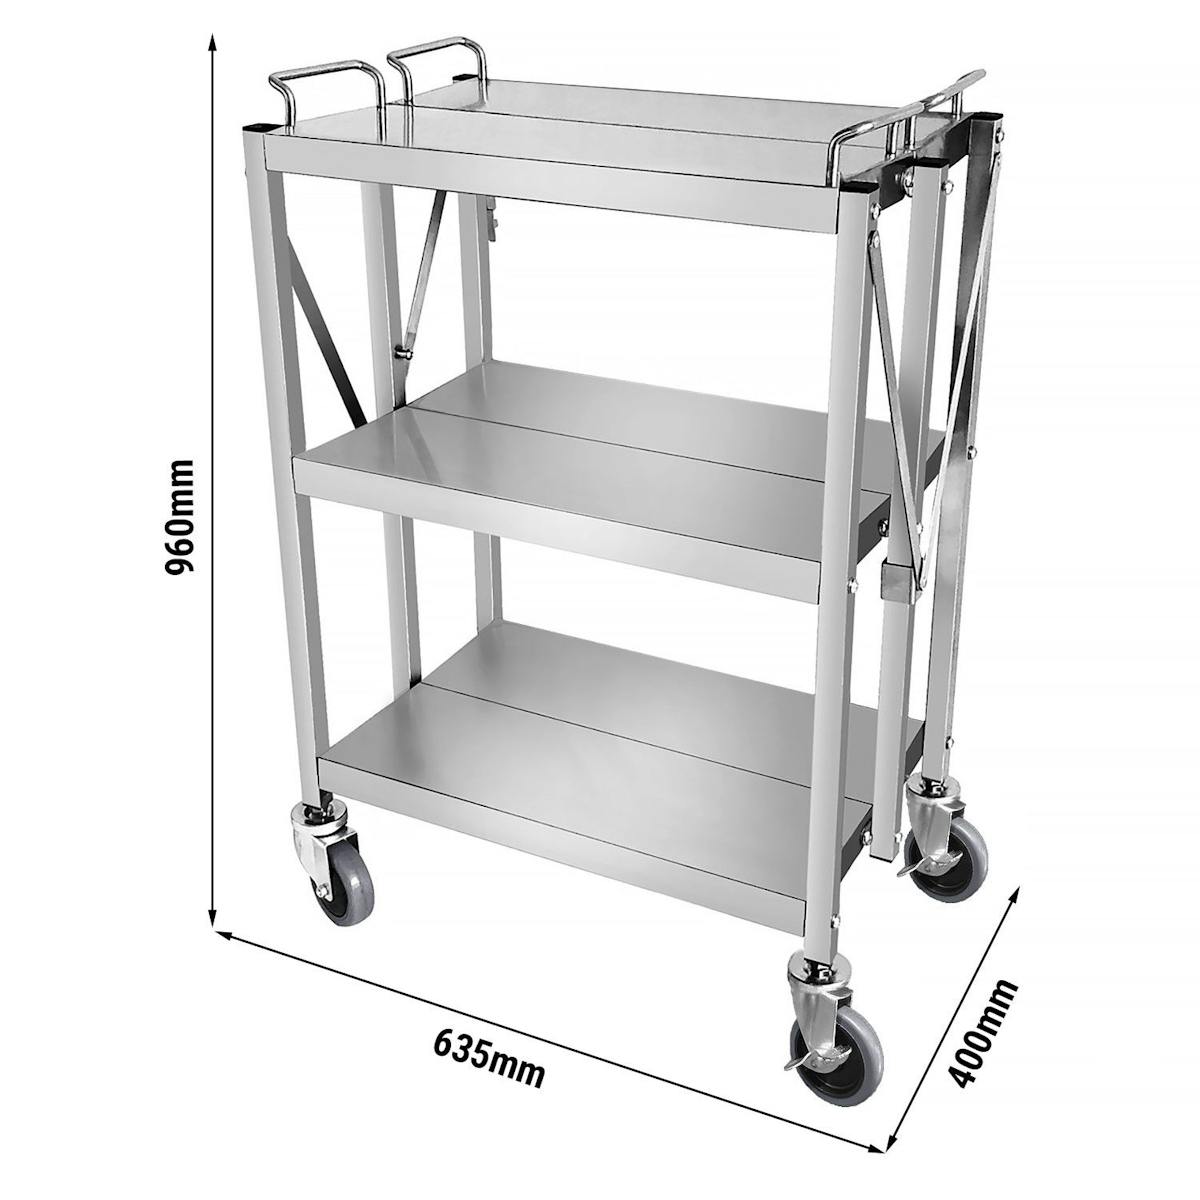 Serving trolley 0,63 m - foldable